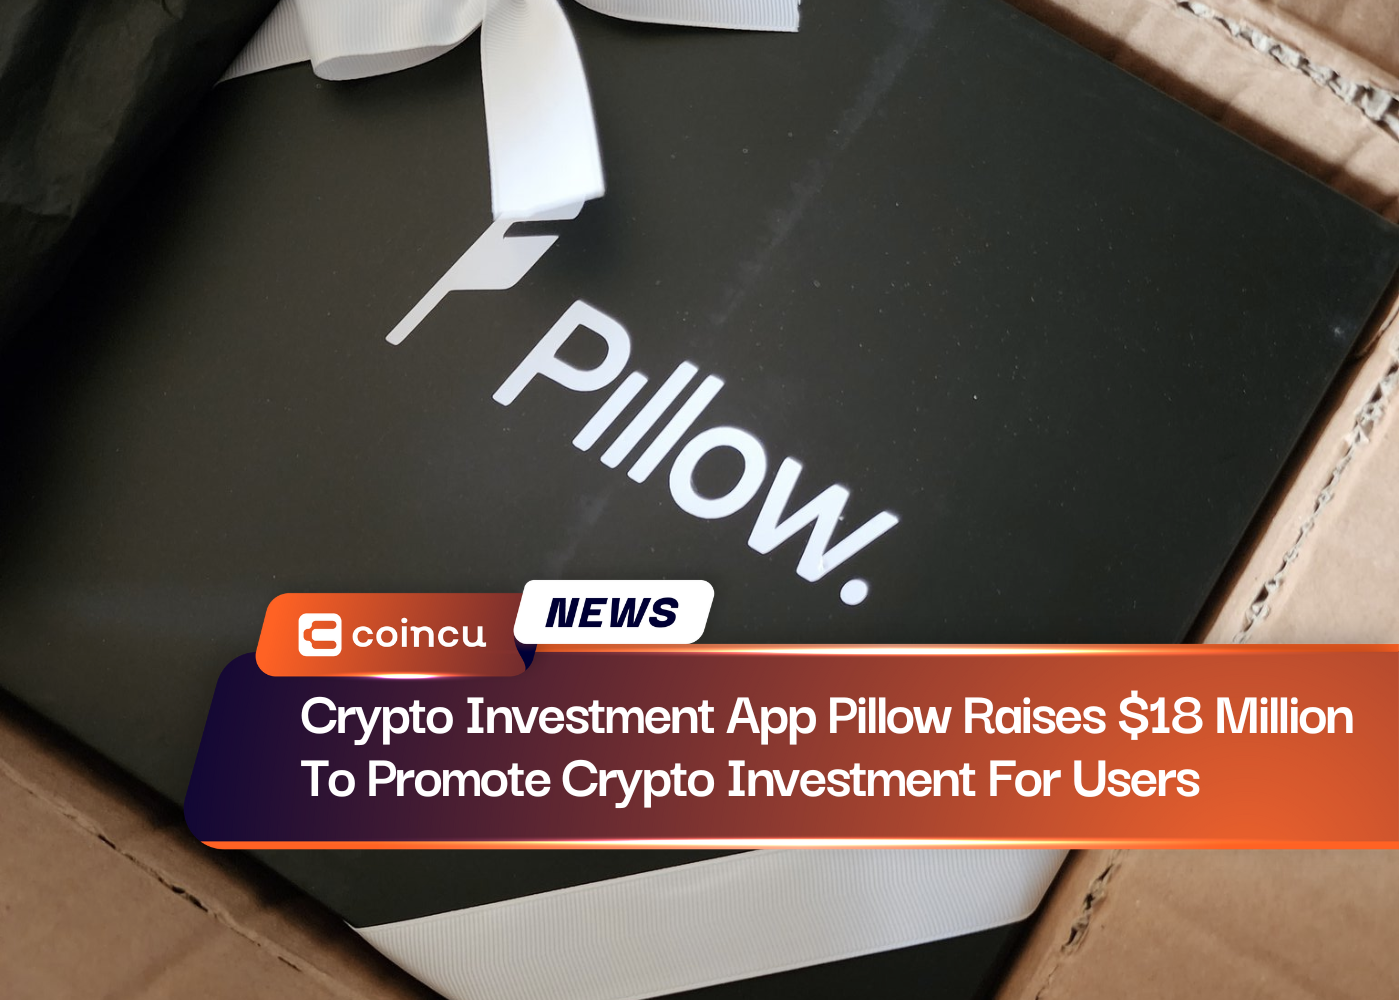 Crypto Investment App Pillow Raises $18 Million To Promote Crypto Investment For Users